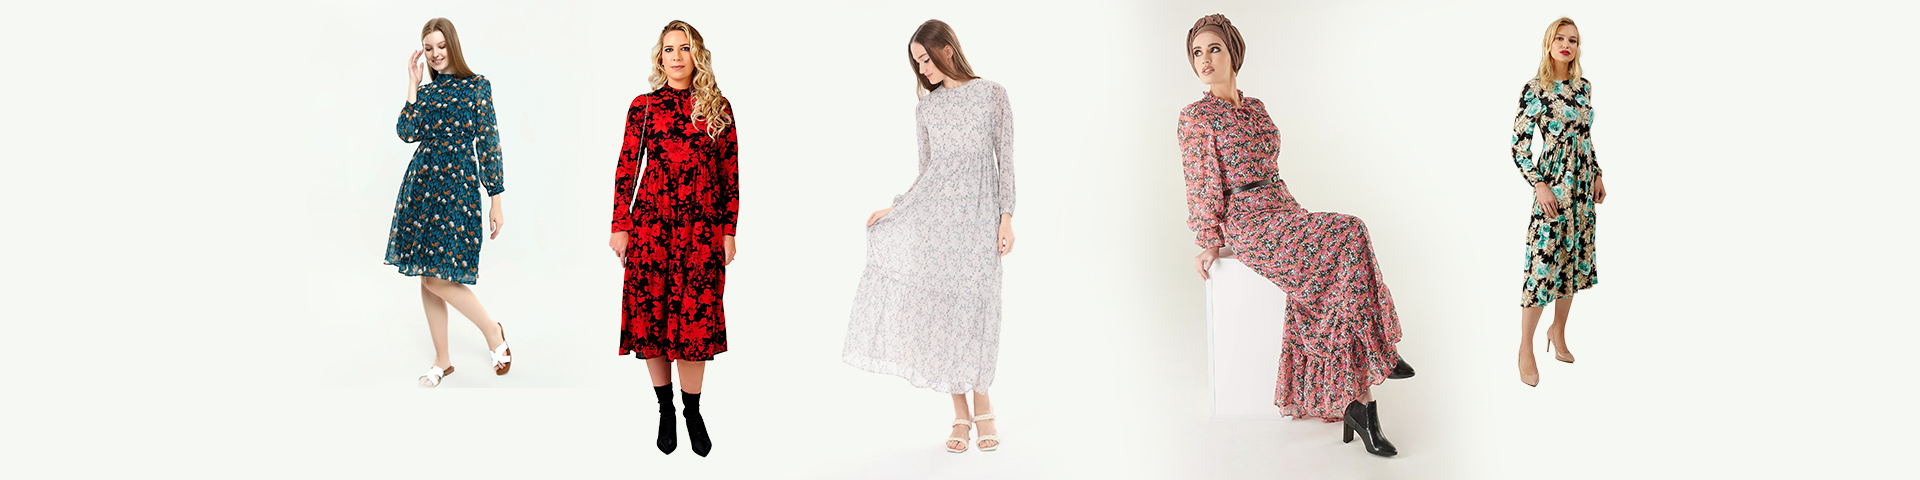 The Elegance of Modest Floral Dresses and Embroidered Designs in the Long Sleeve Maxi Dress Trend